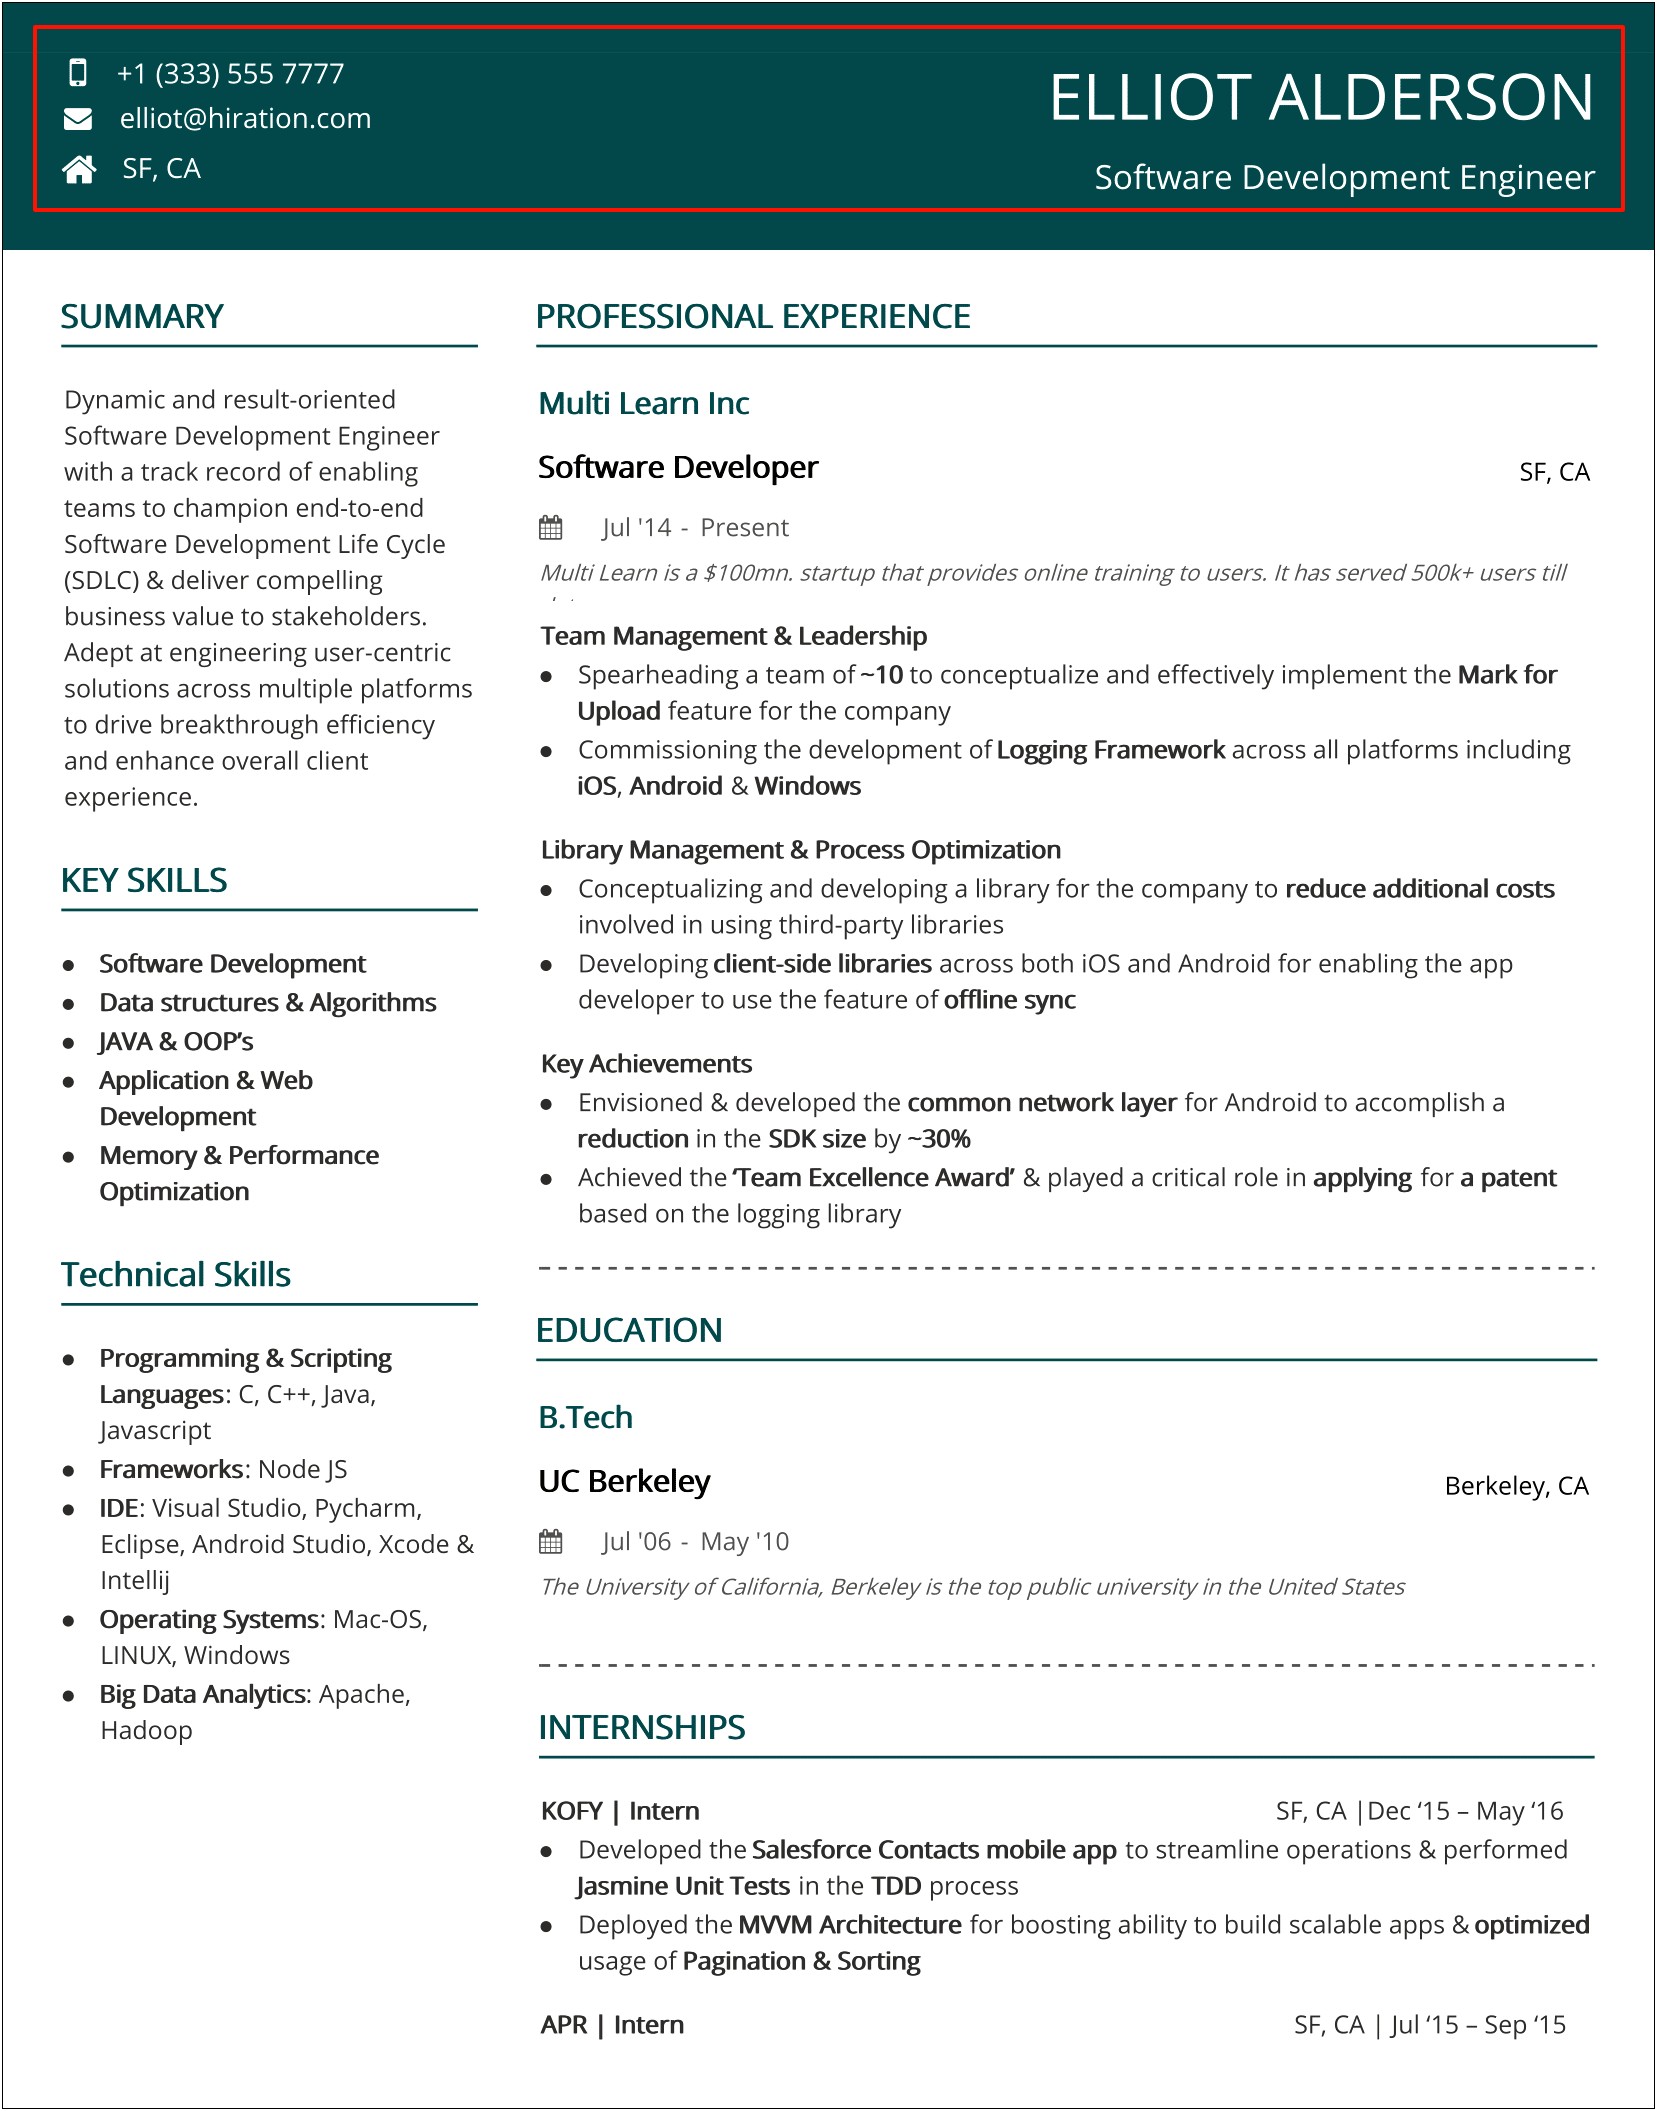 Best Resume Title For Engineer